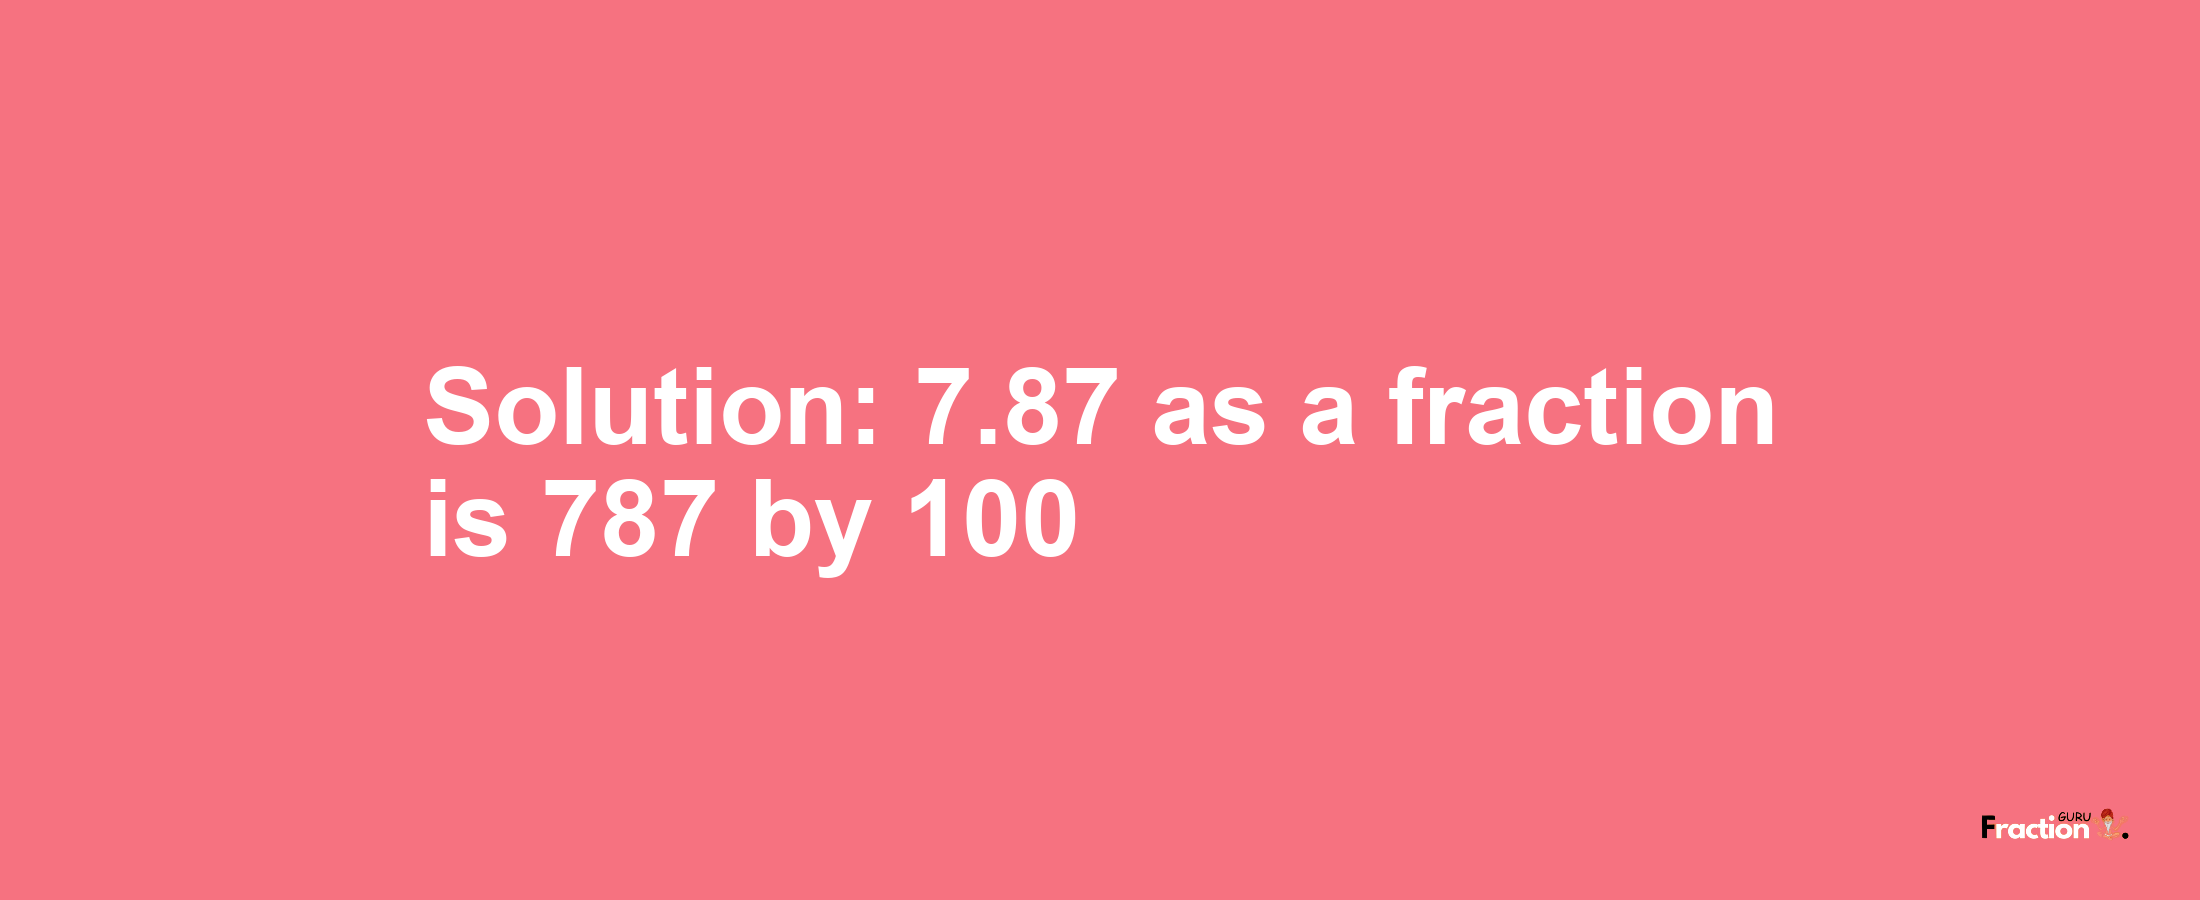 Solution:7.87 as a fraction is 787/100